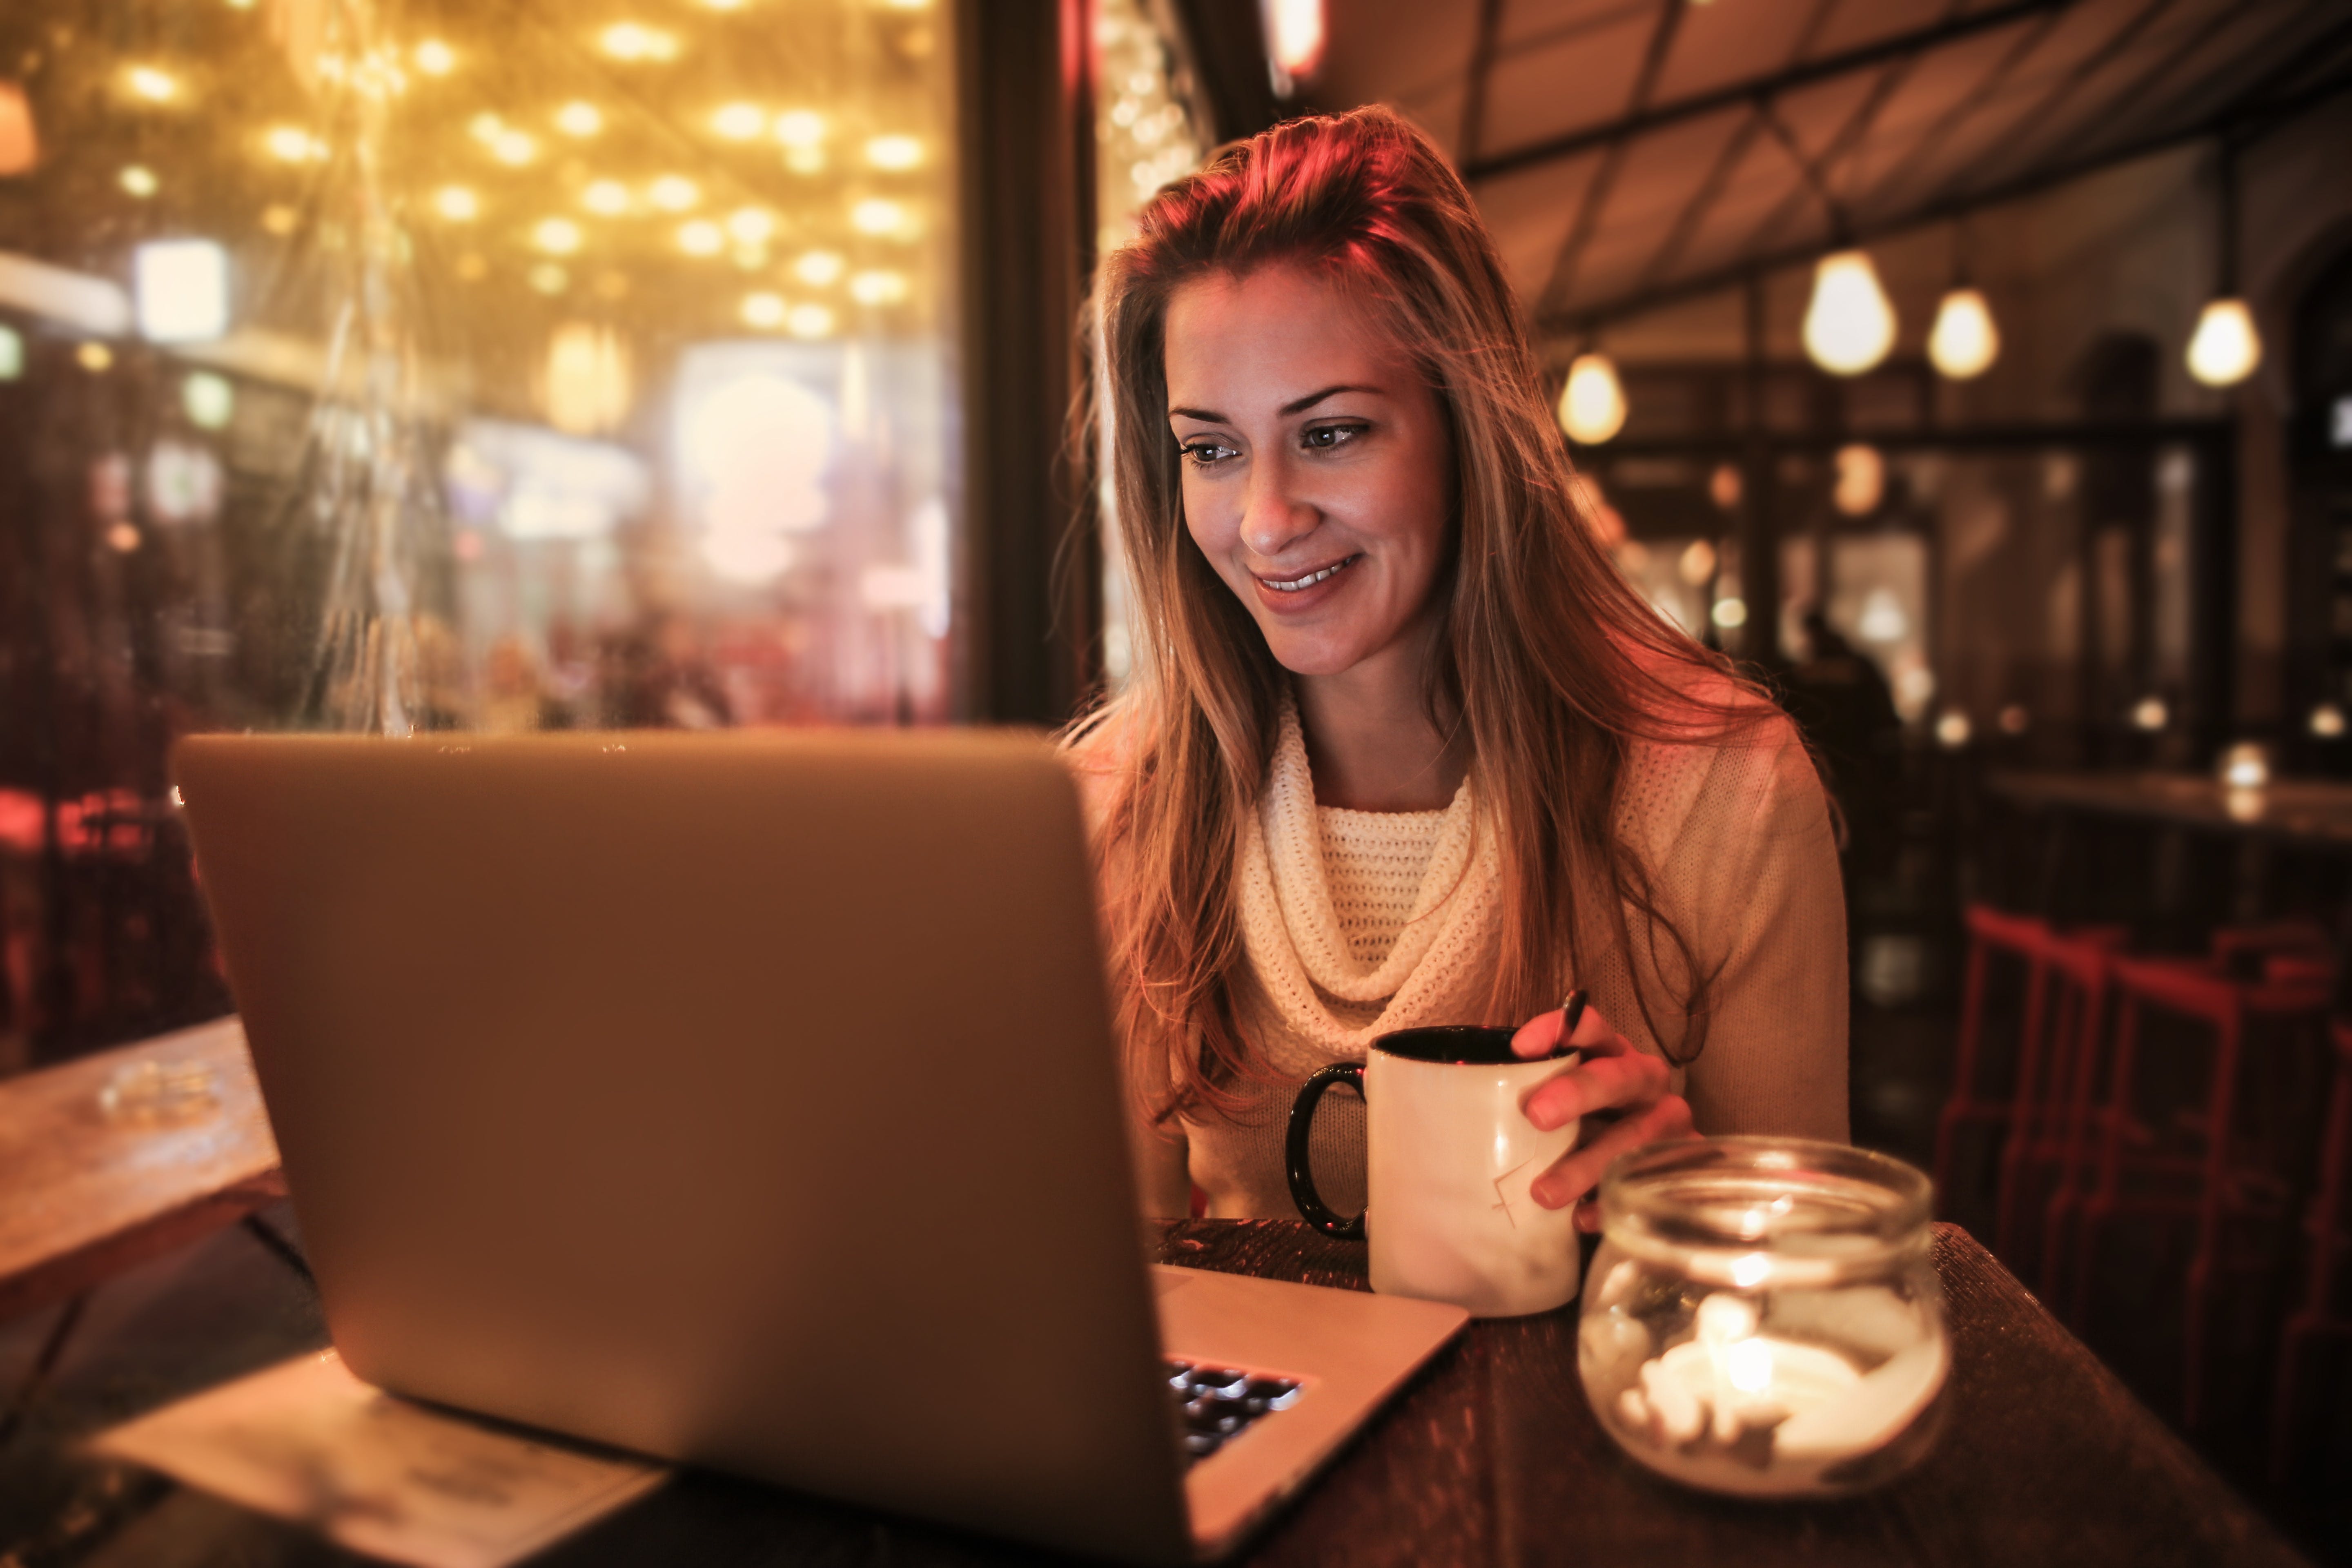 woman smiling while sitting at a table with a laptop and coffee